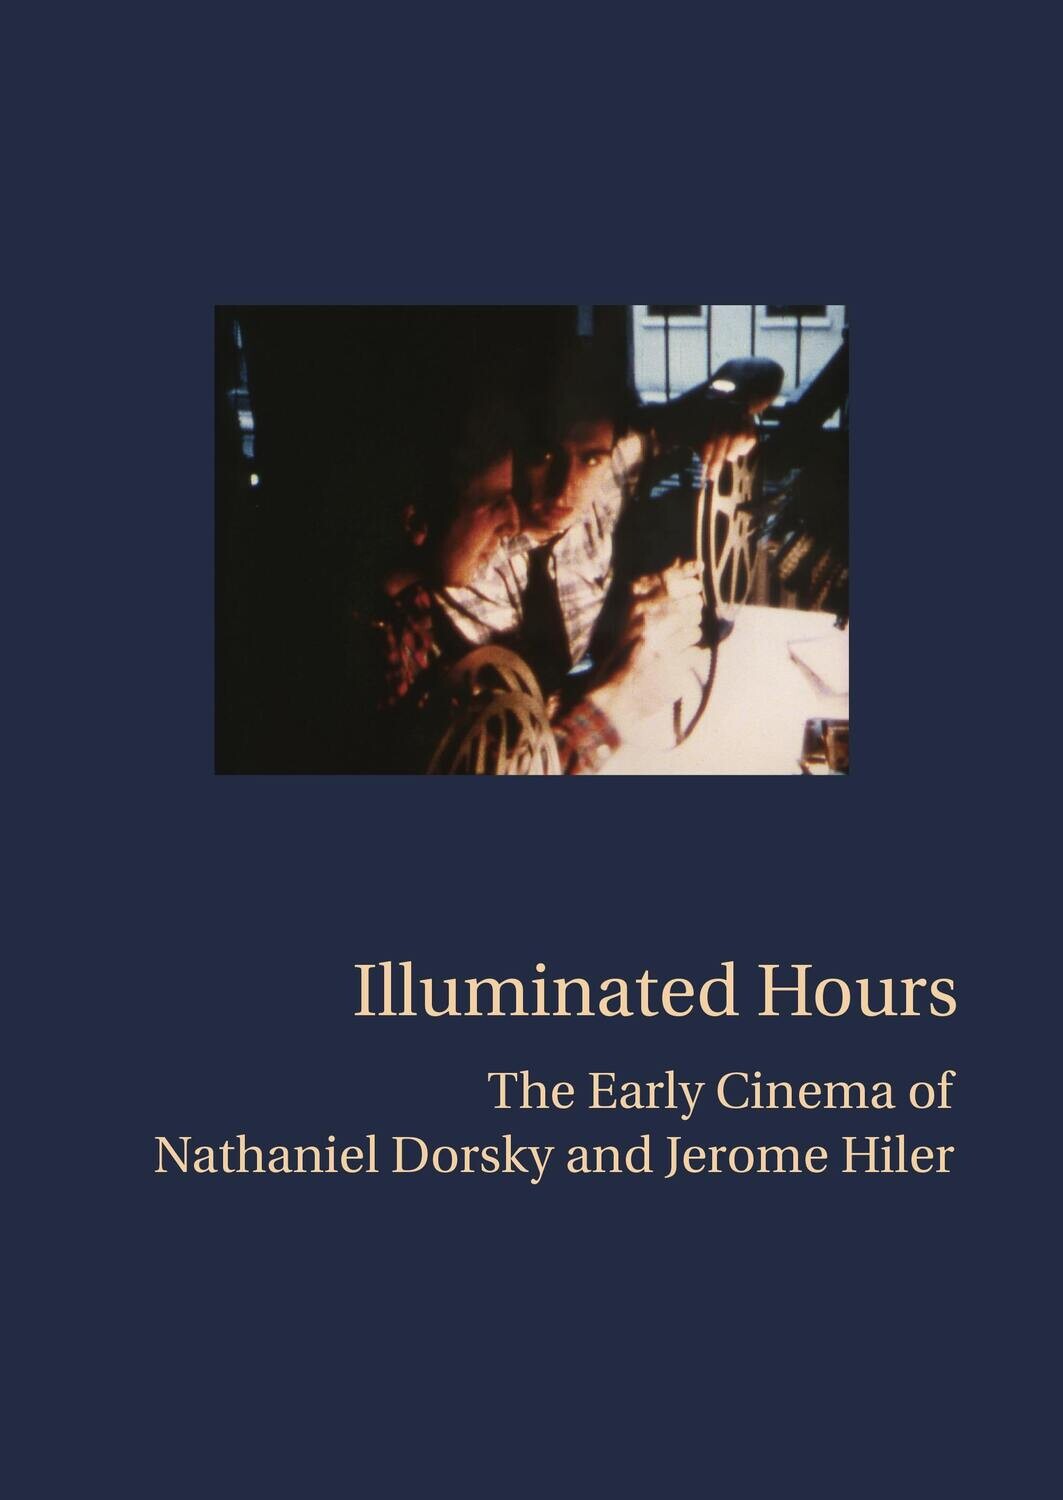 Illuminated Hours: The Early Cinema of Nathaniel Dorsky and Jerome Hiler